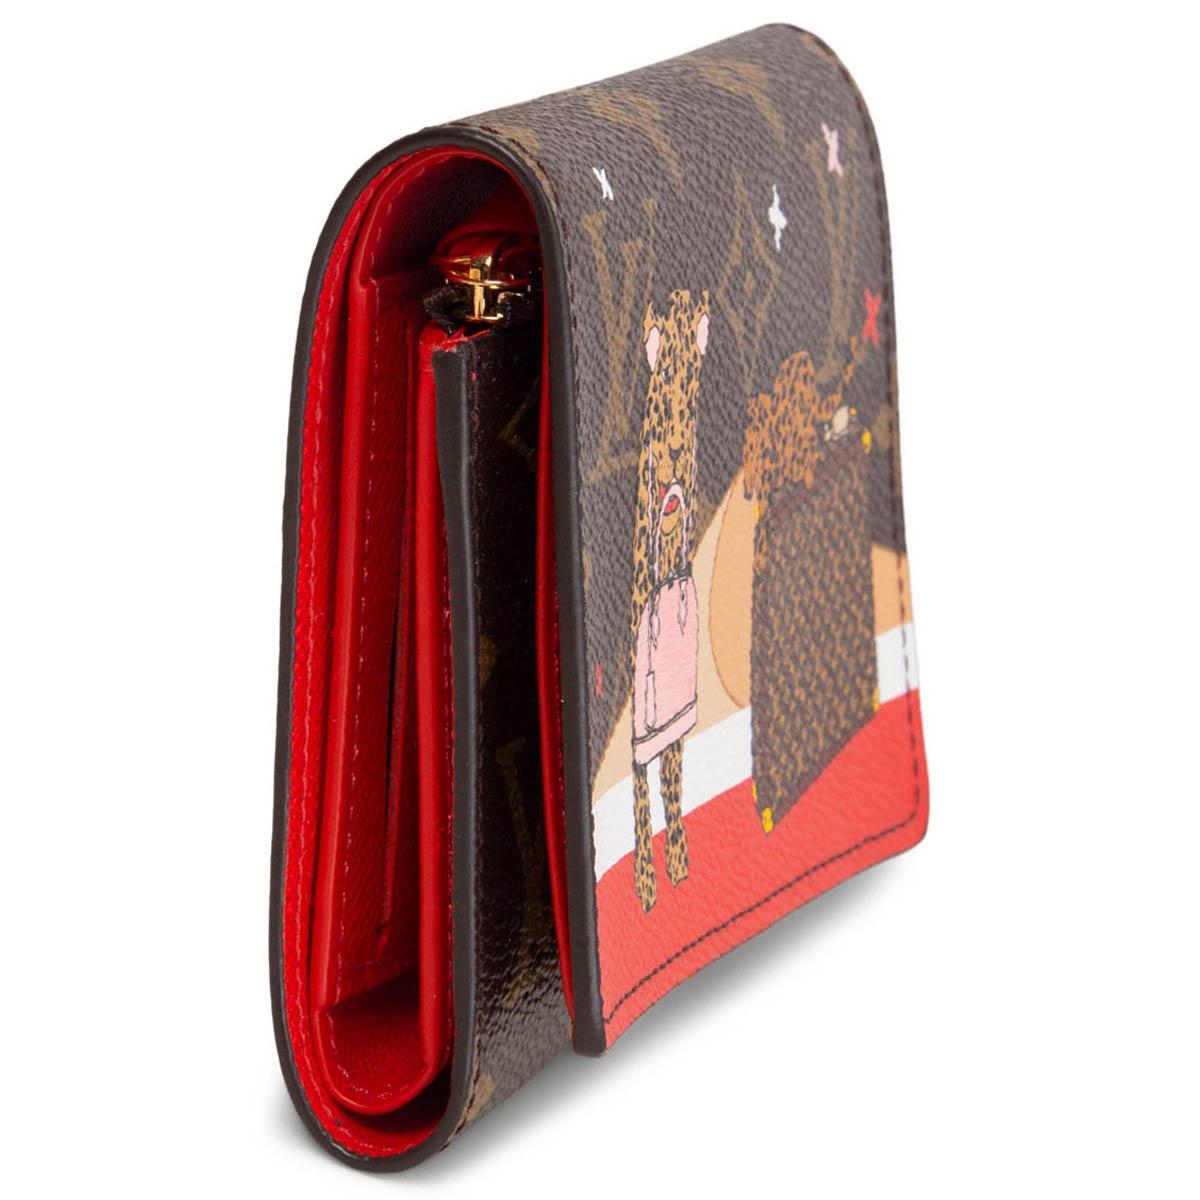 100% authentic Louis Vuitton limited edition 2018 Christmas Animation Victorine wallet in brown monogram canvas with big cats, trunk and Alma print. Closes with a snap button. Lined in red leather with a zipper pocket for coins, six credit card